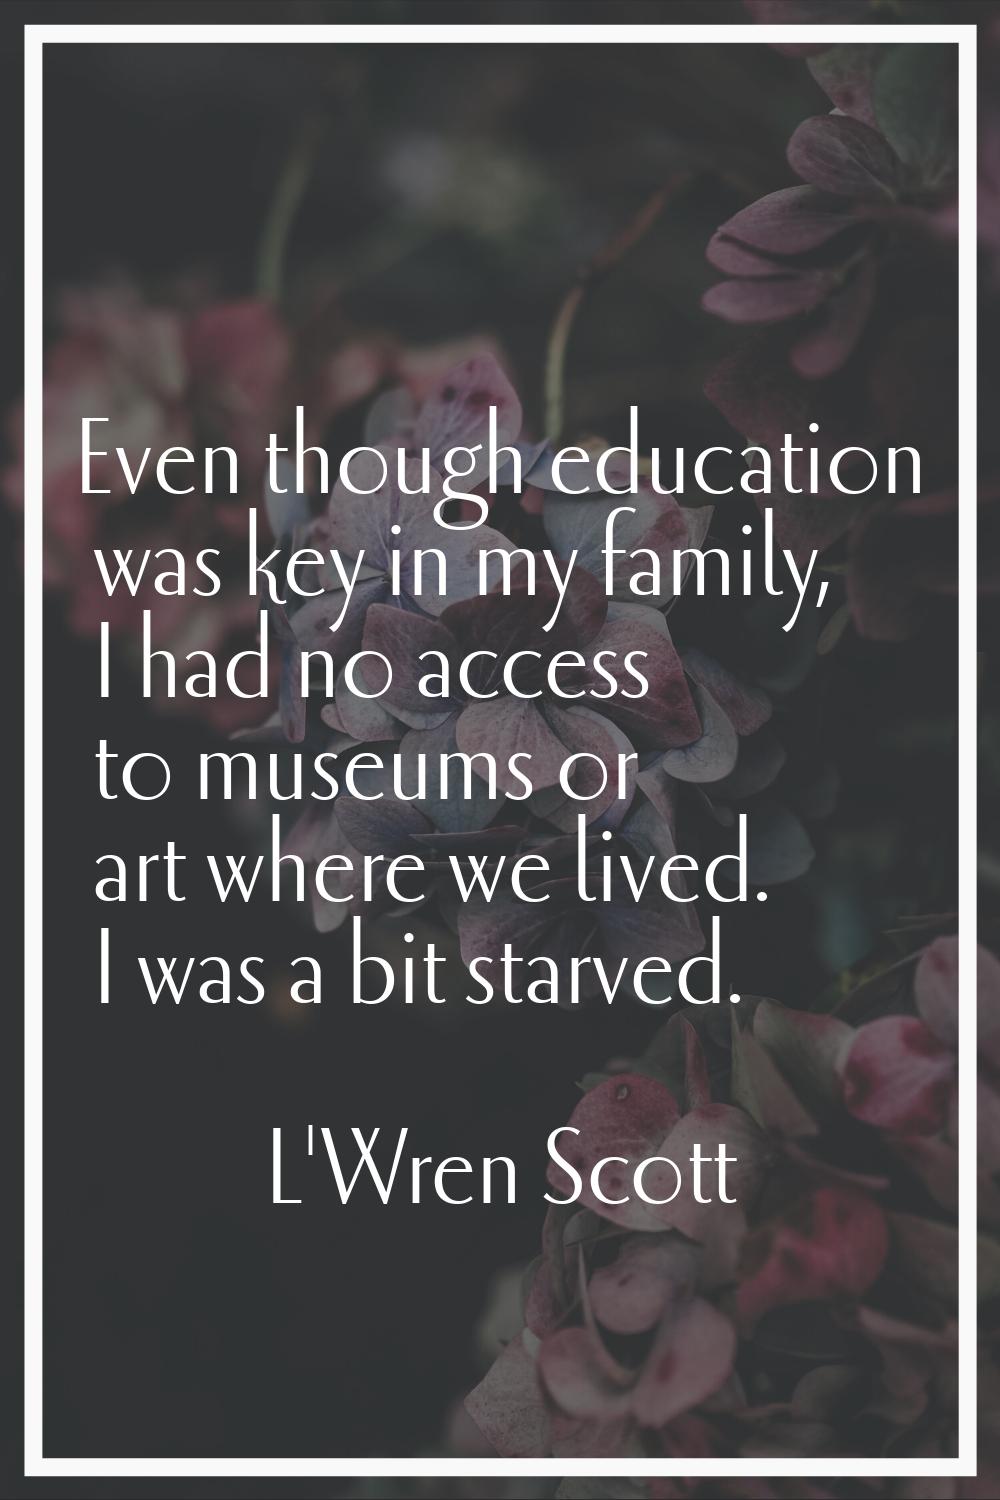 Even though education was key in my family, I had no access to museums or art where we lived. I was